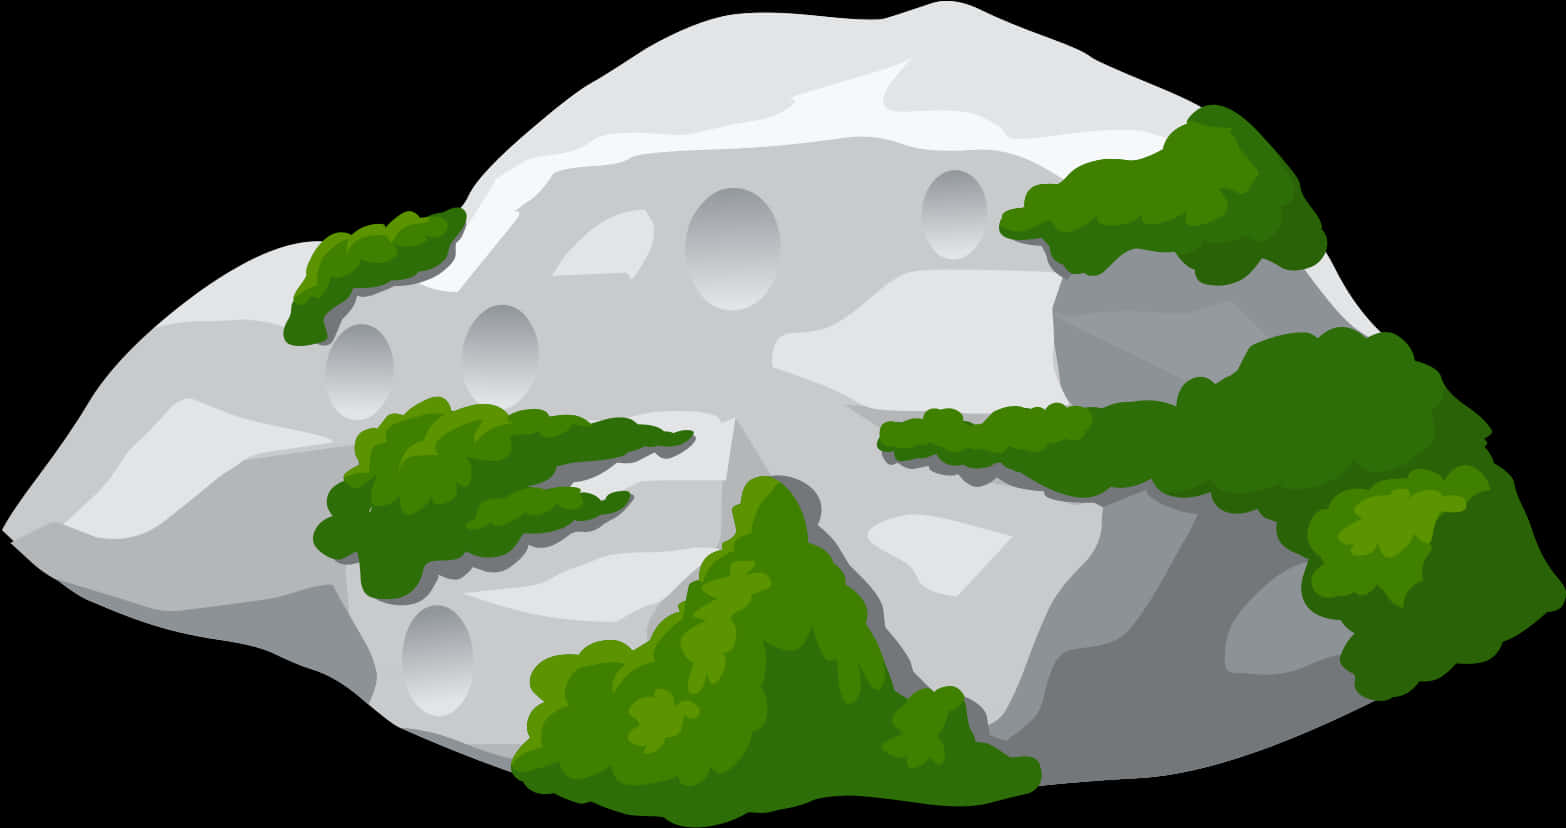 Snowy Mountain Rock Vector Illustration PNG